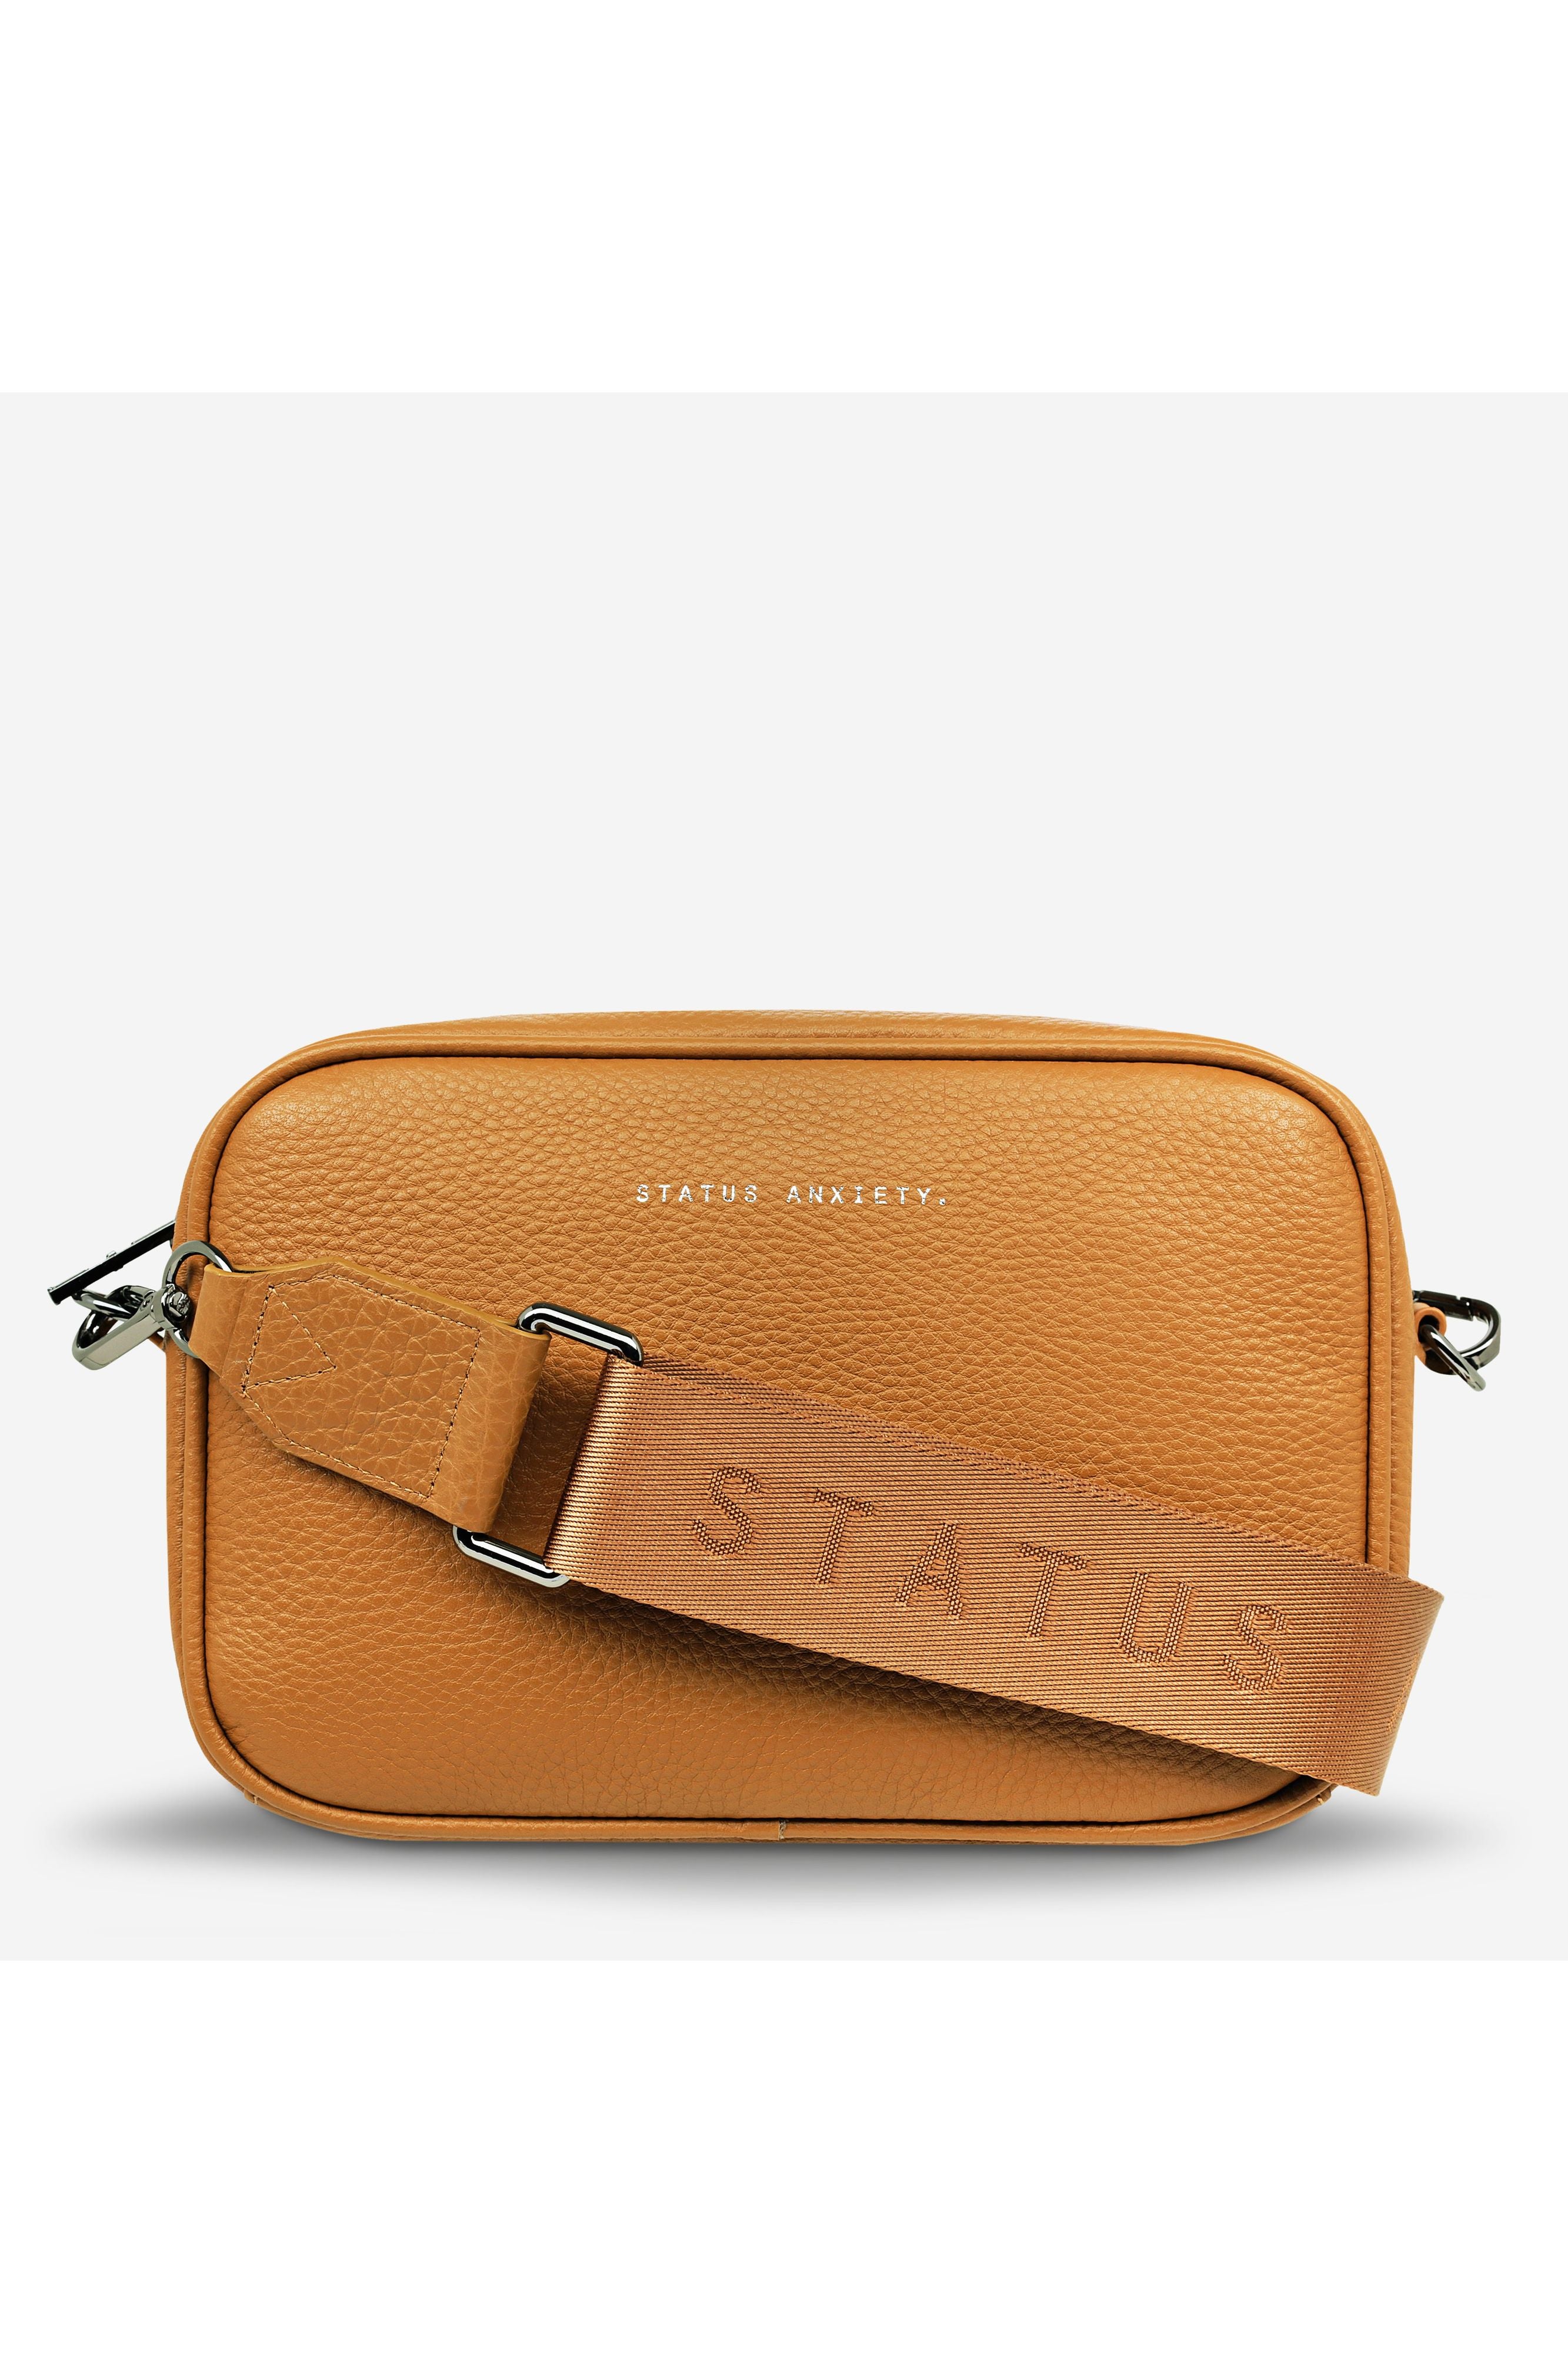 Status Anxiety - Plunder with Web Strap - Tan